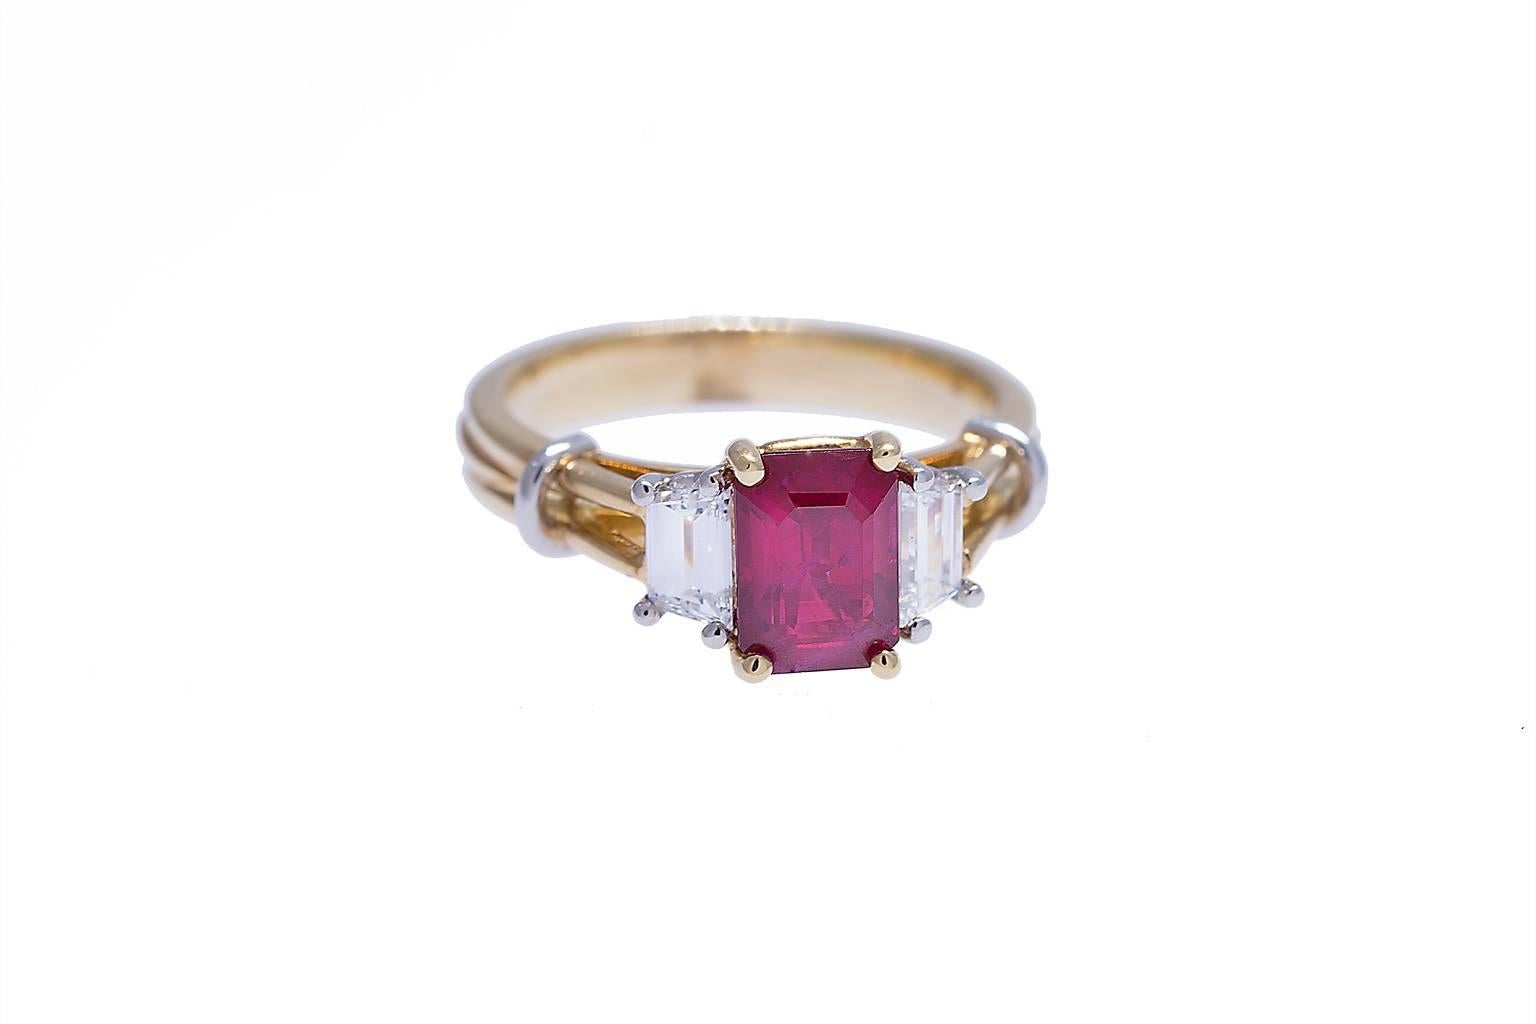 18K and platinum ruby and diamond ring containing one emerald cut ruby weighing 1.50 carats and two trapeze cut diamonds weighing combined 0.43 carat. Diamonds are F/VS1. This ring was designed and made in house with stones handpicked by our